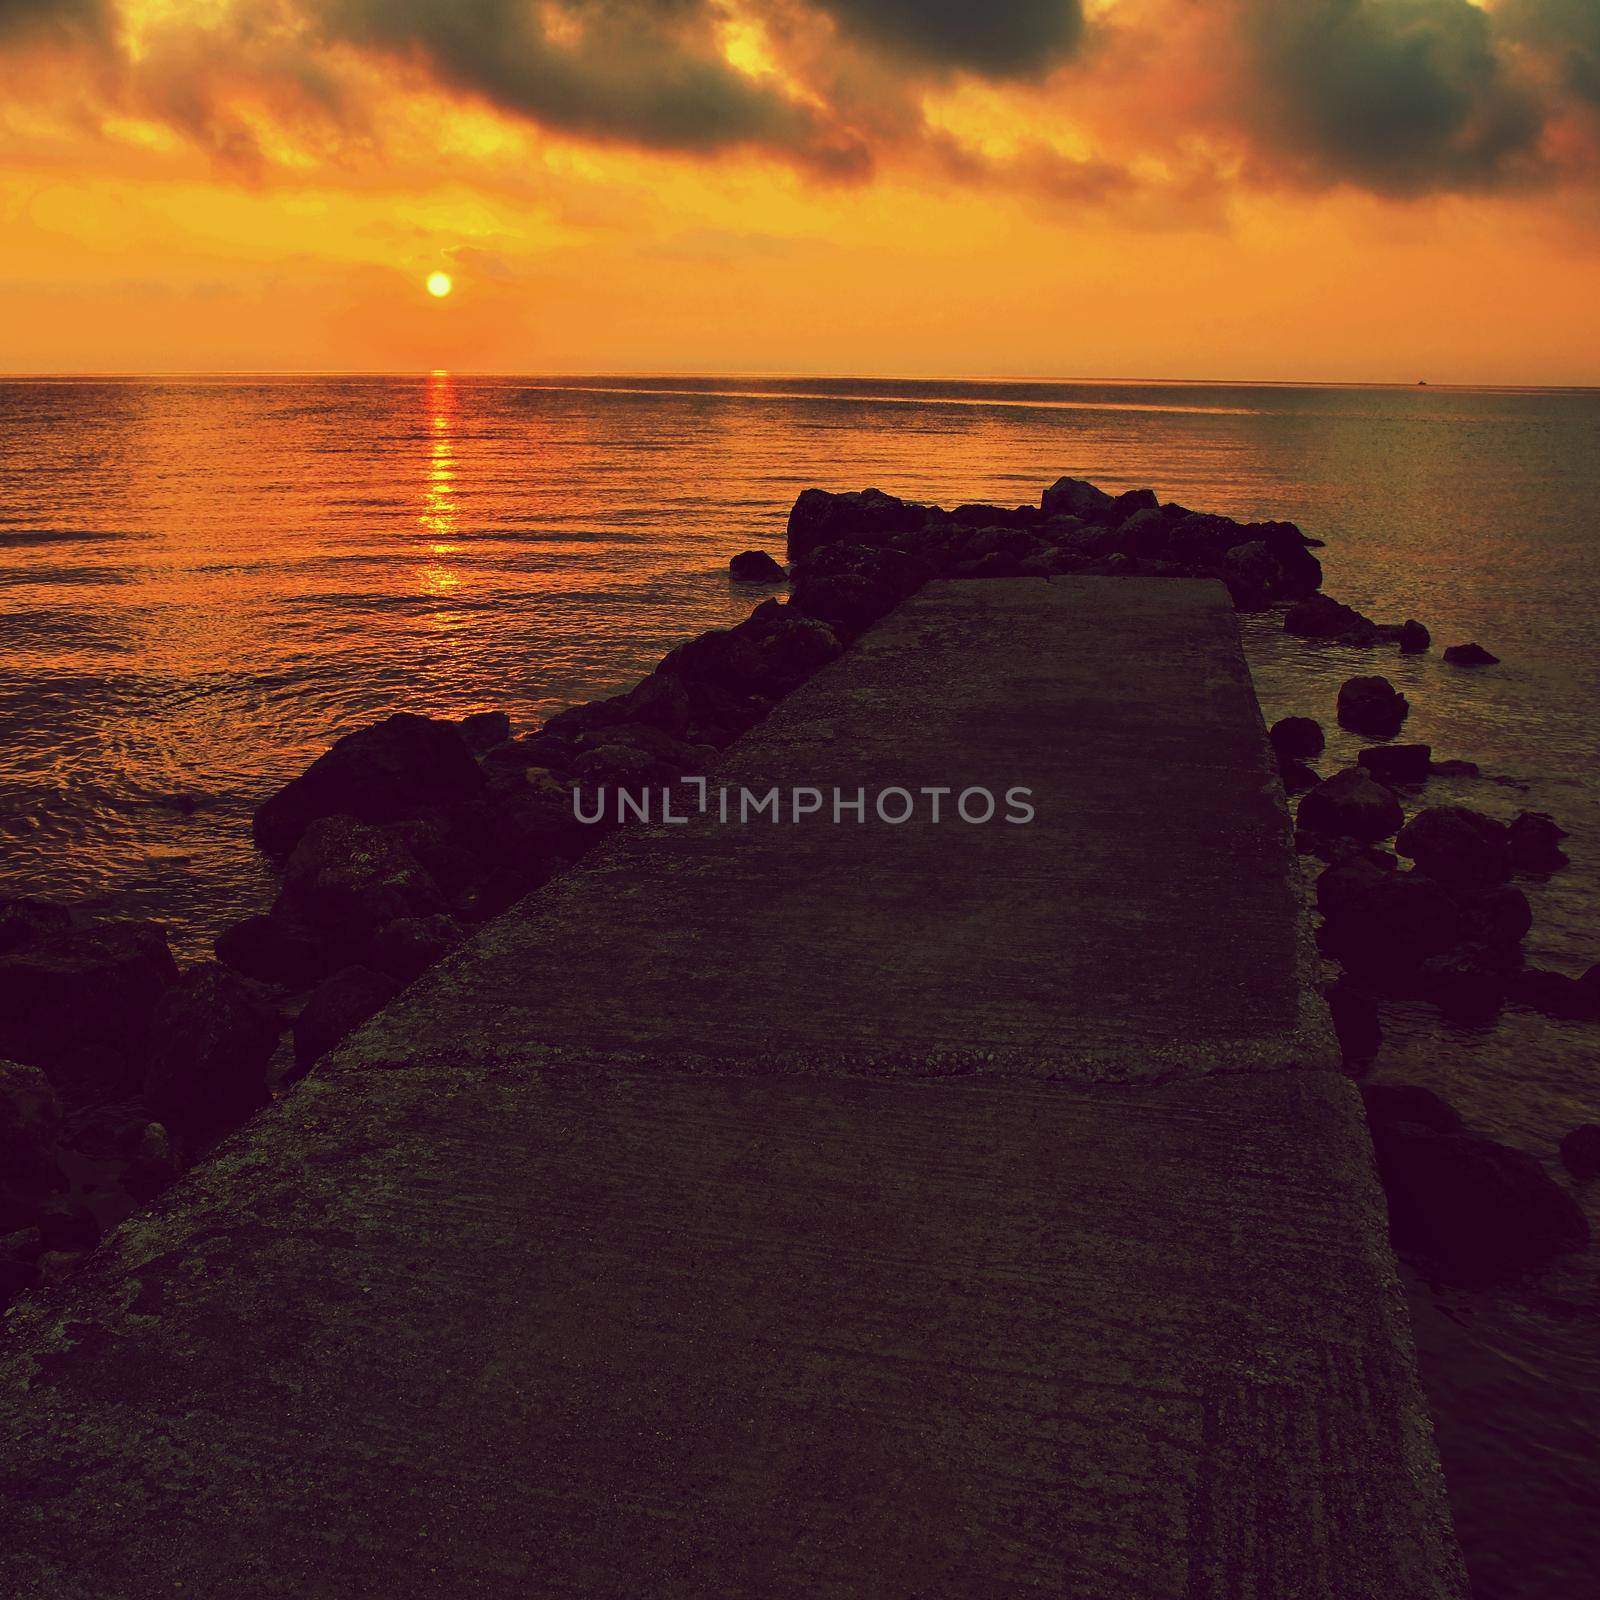 Sunset - sunrise by the sea on the beach. Beautiful romantic landscape with nature.